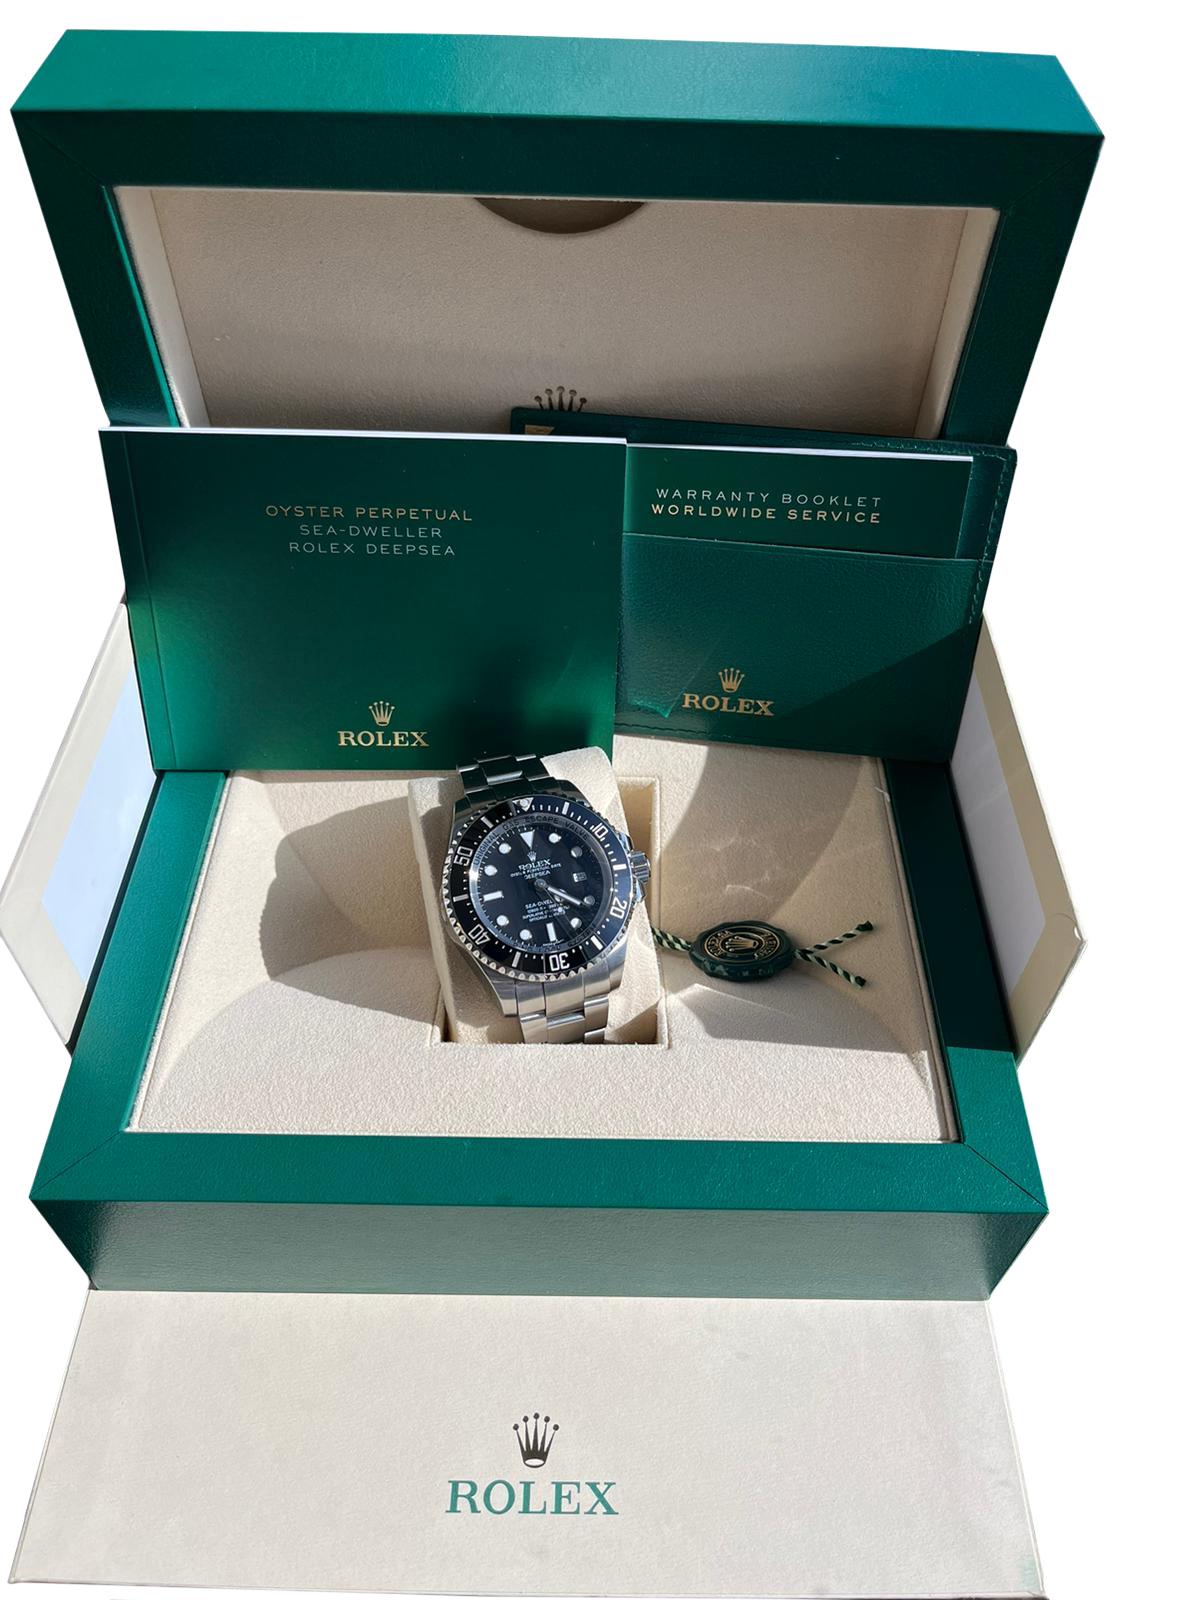 The Rolex Sea-Dweller Deepsea Men’s watch 116660 is an authentic Swiss-made luxury watch that features a 904L Oystersteel stainless steel case and matching Oystersteel stainless steel oyster bracelet with Oysterlock deployment buckle with Glidelock